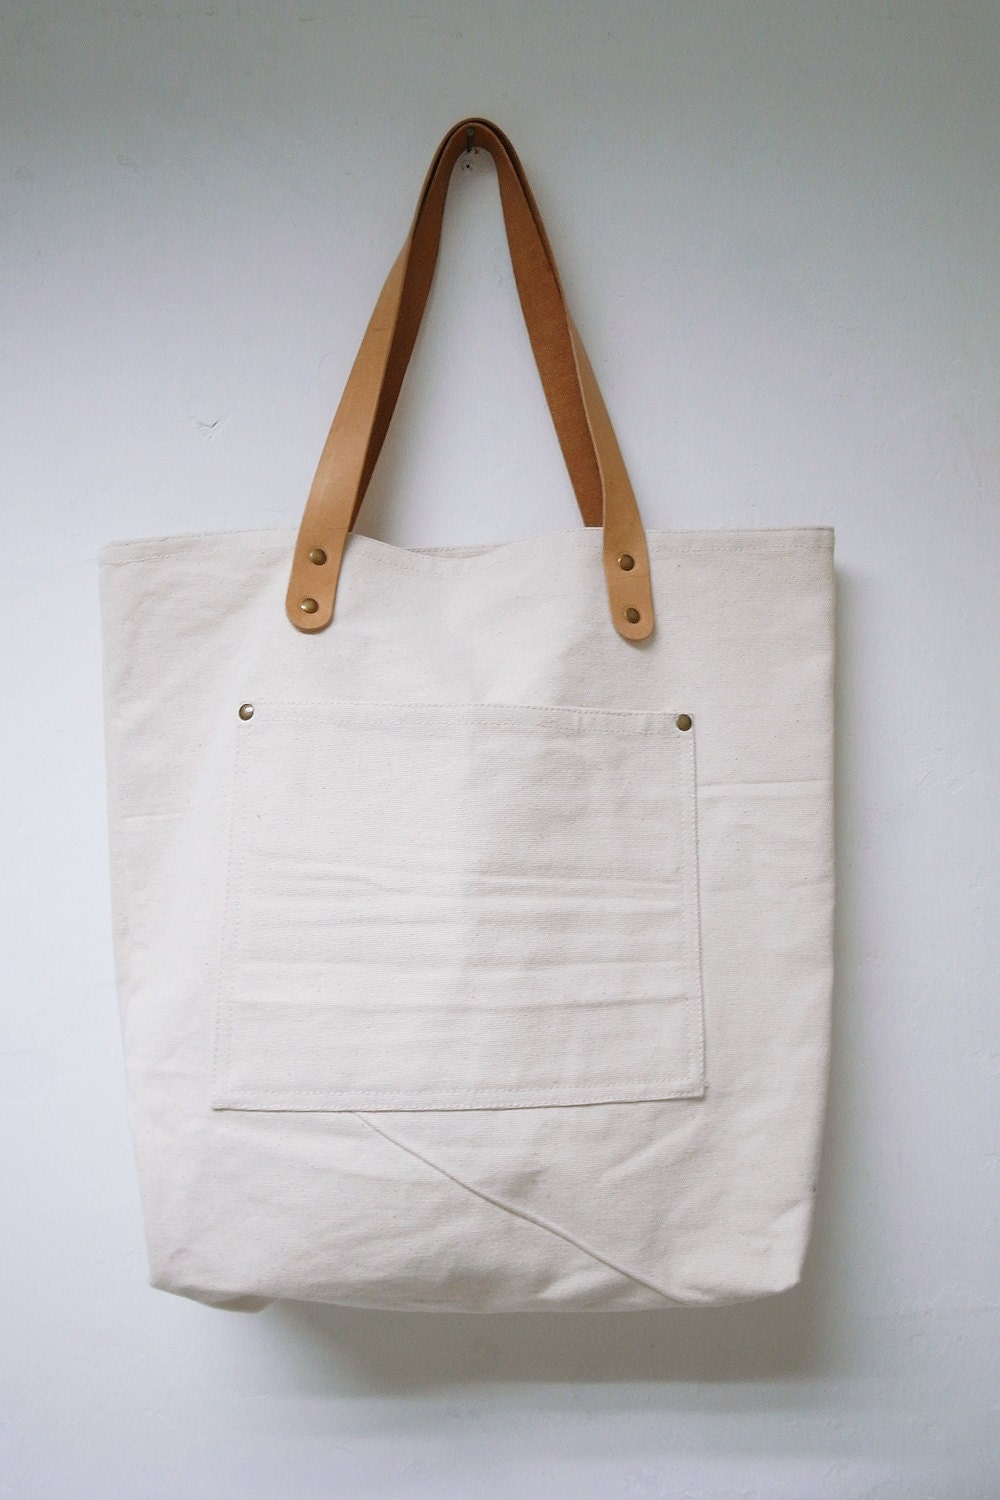 Leather And Canvas Tote Bags Leathinity beige canvas tote